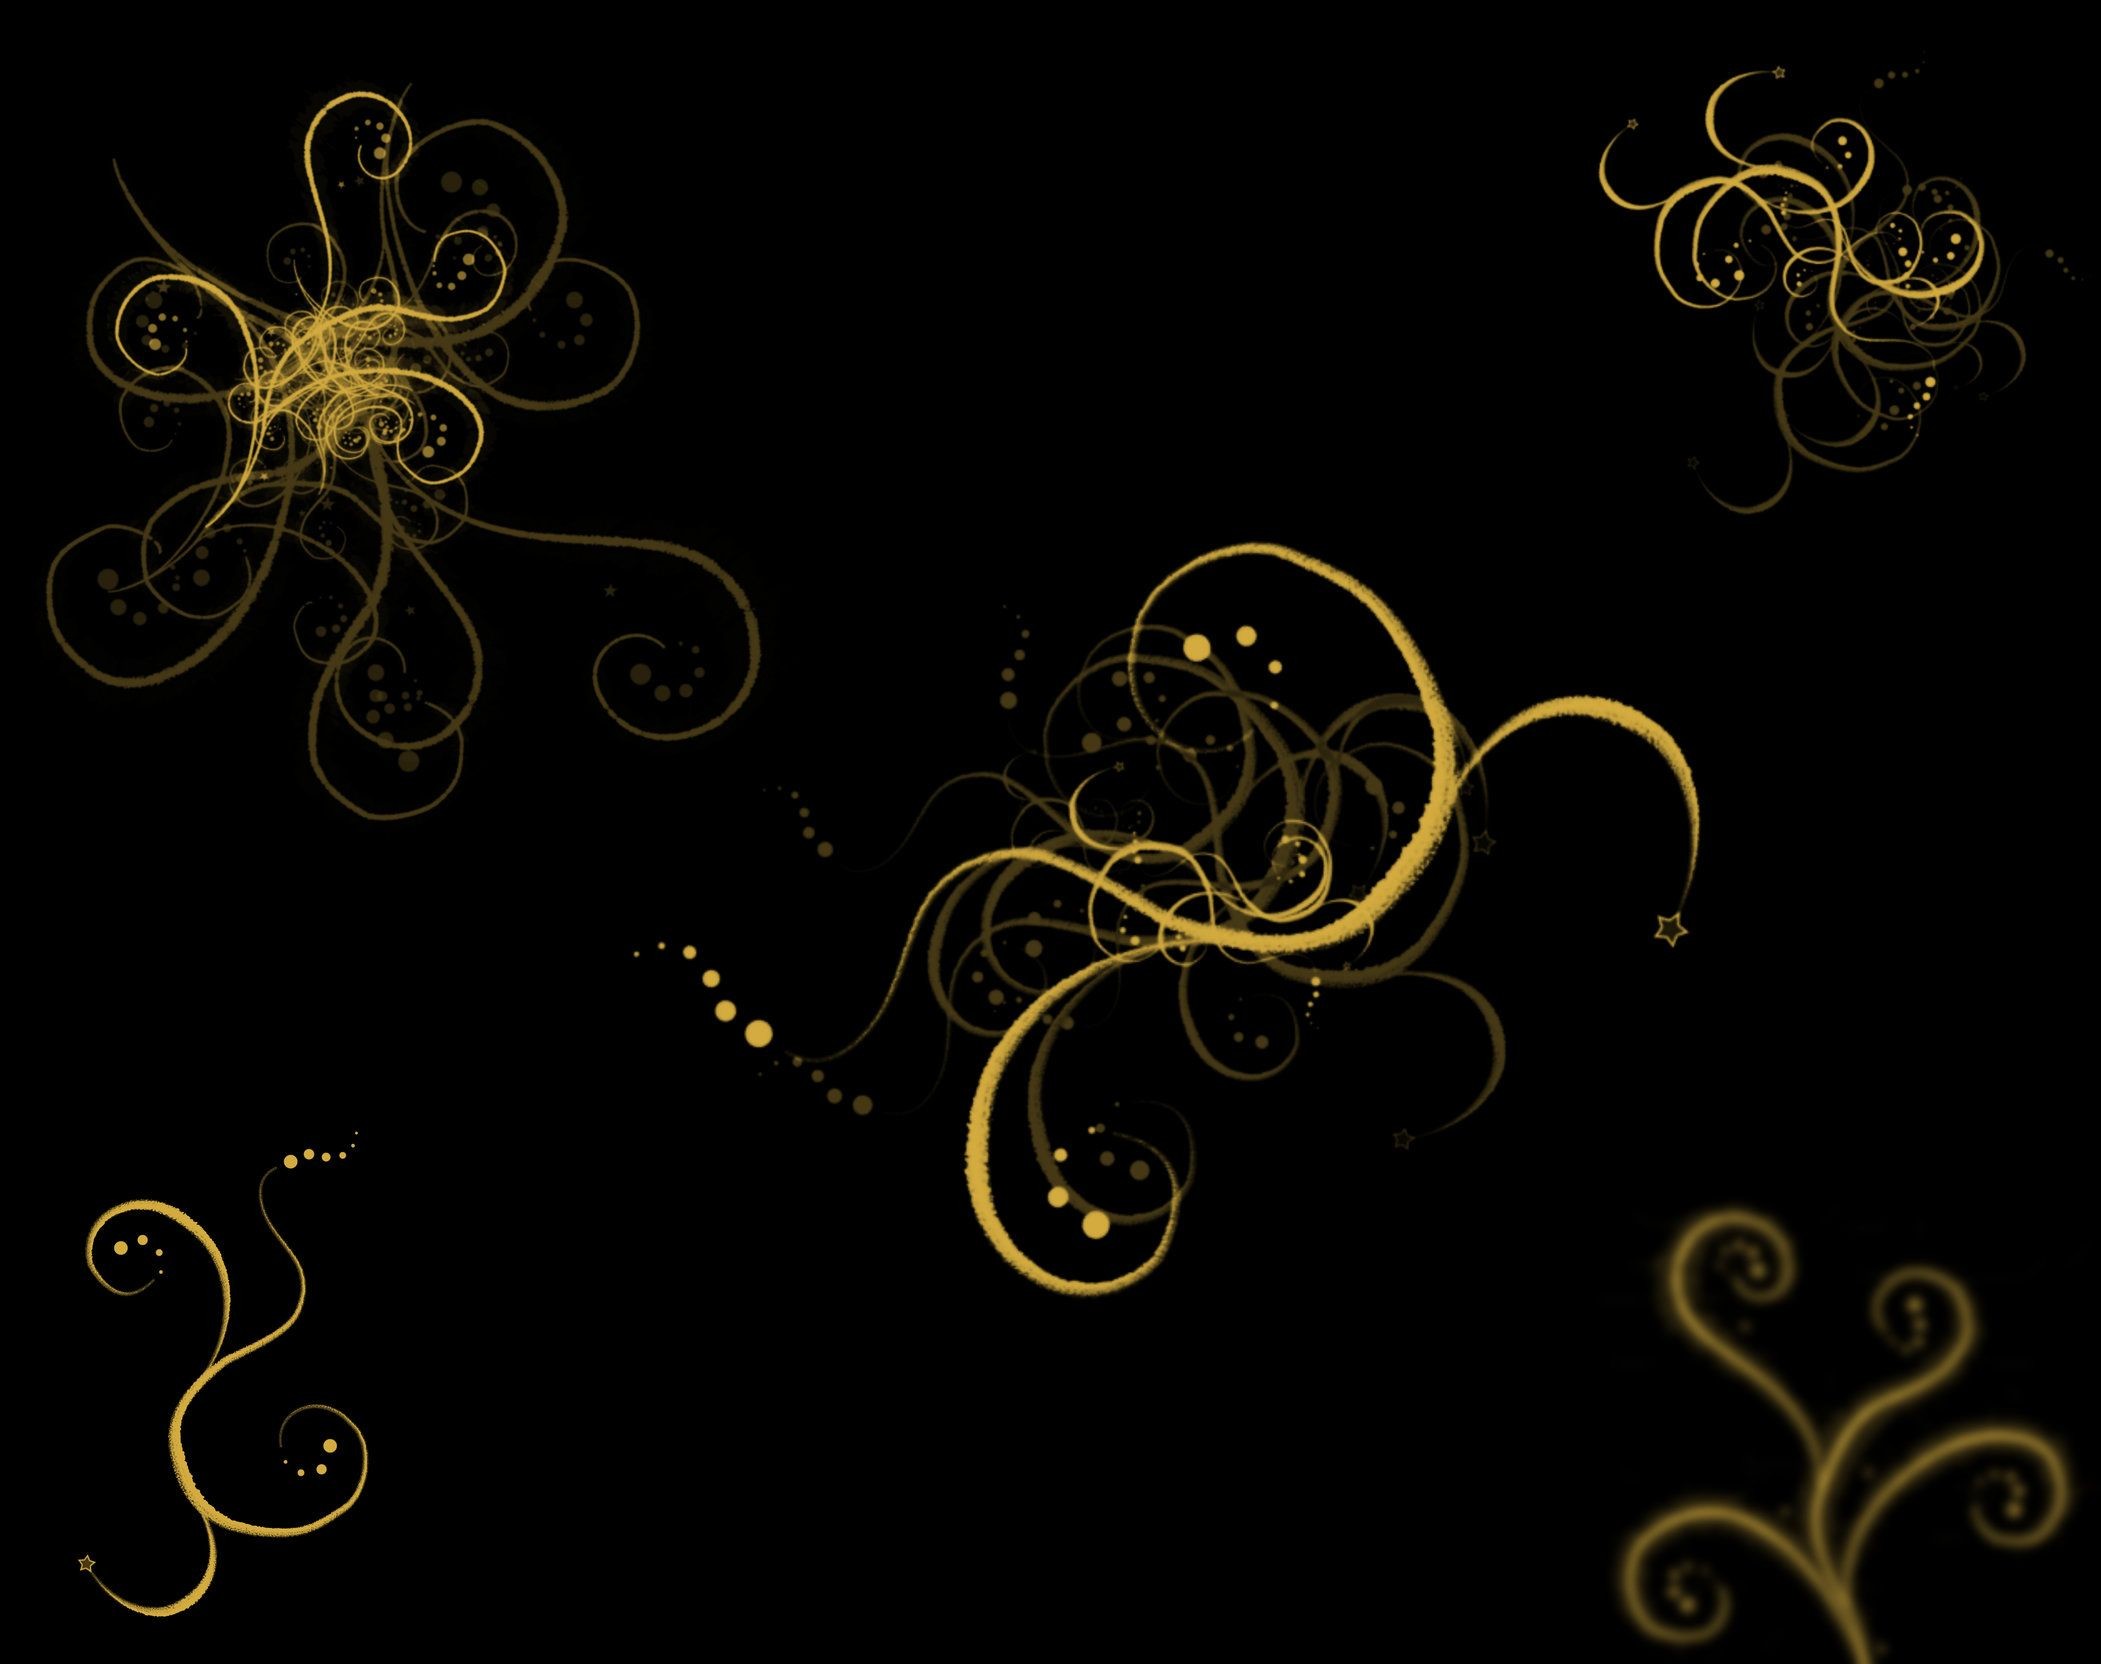 2101x1664 Black And Gold Wallpaper Hd Android Desktop Abstract Iphone 5 Design .